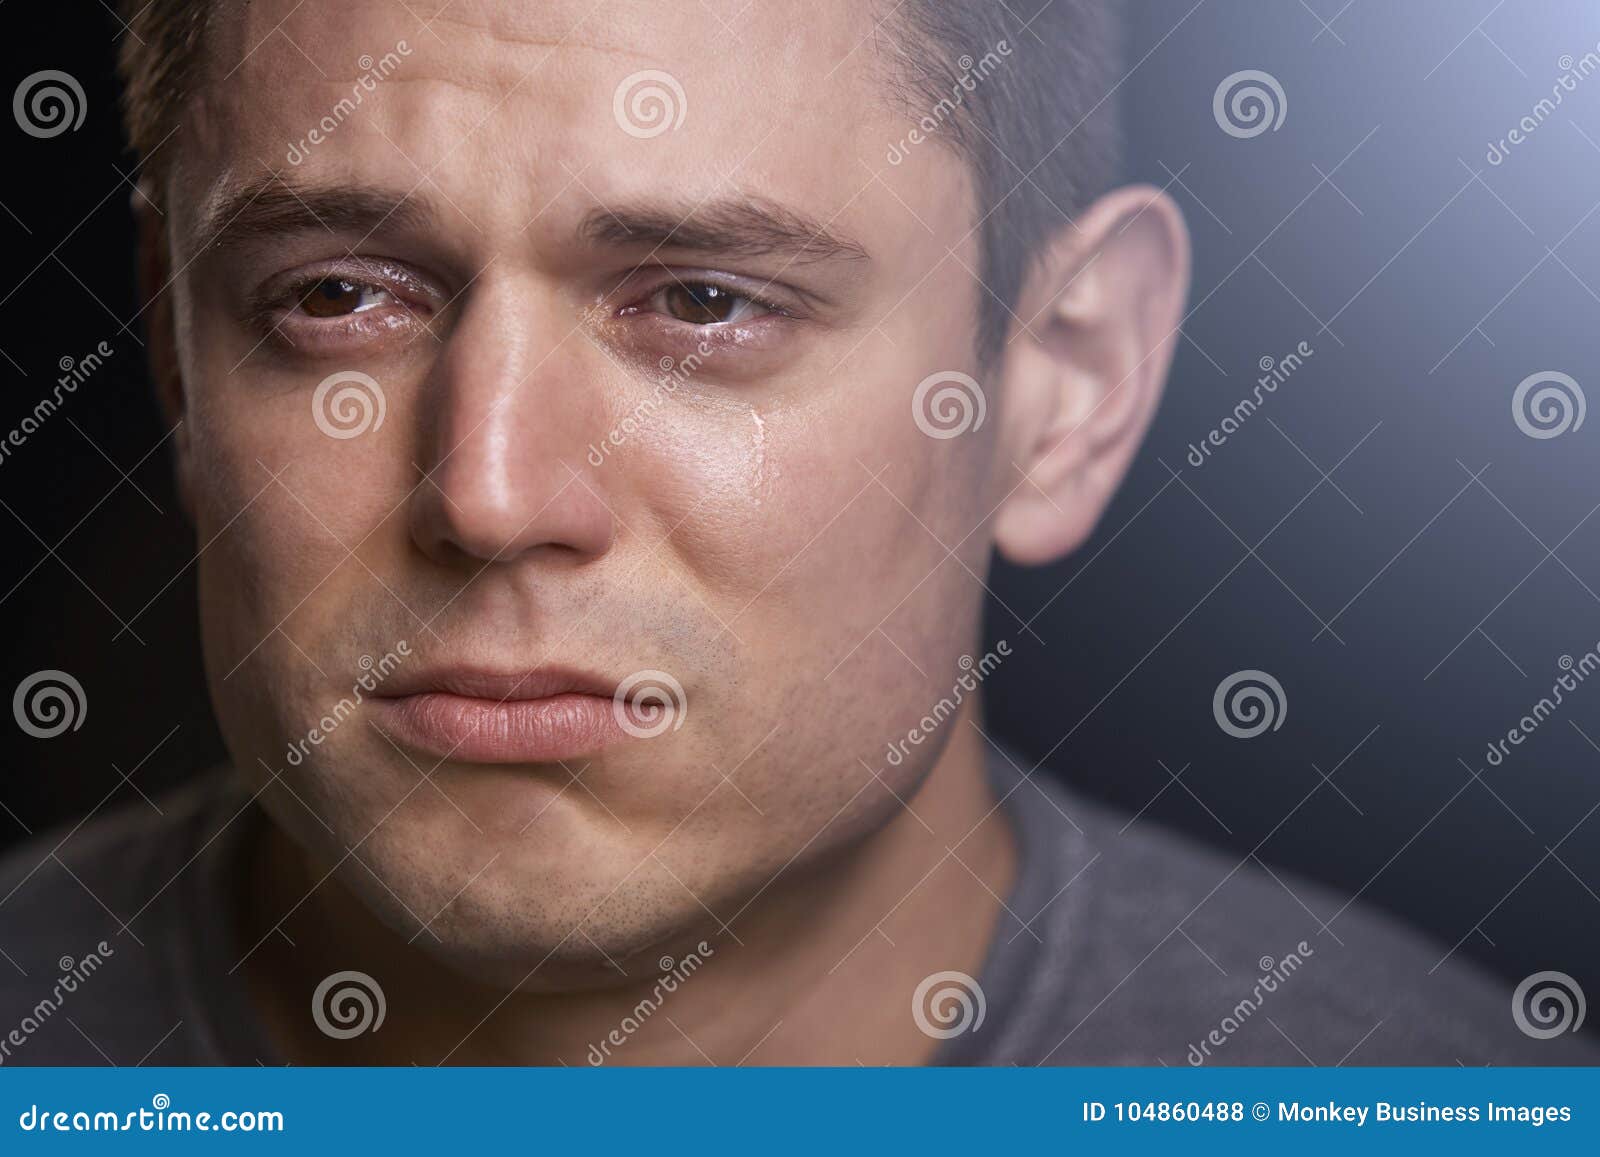 Close Up Portrait of Crying Young White Man Looking Away Stock Photo ...